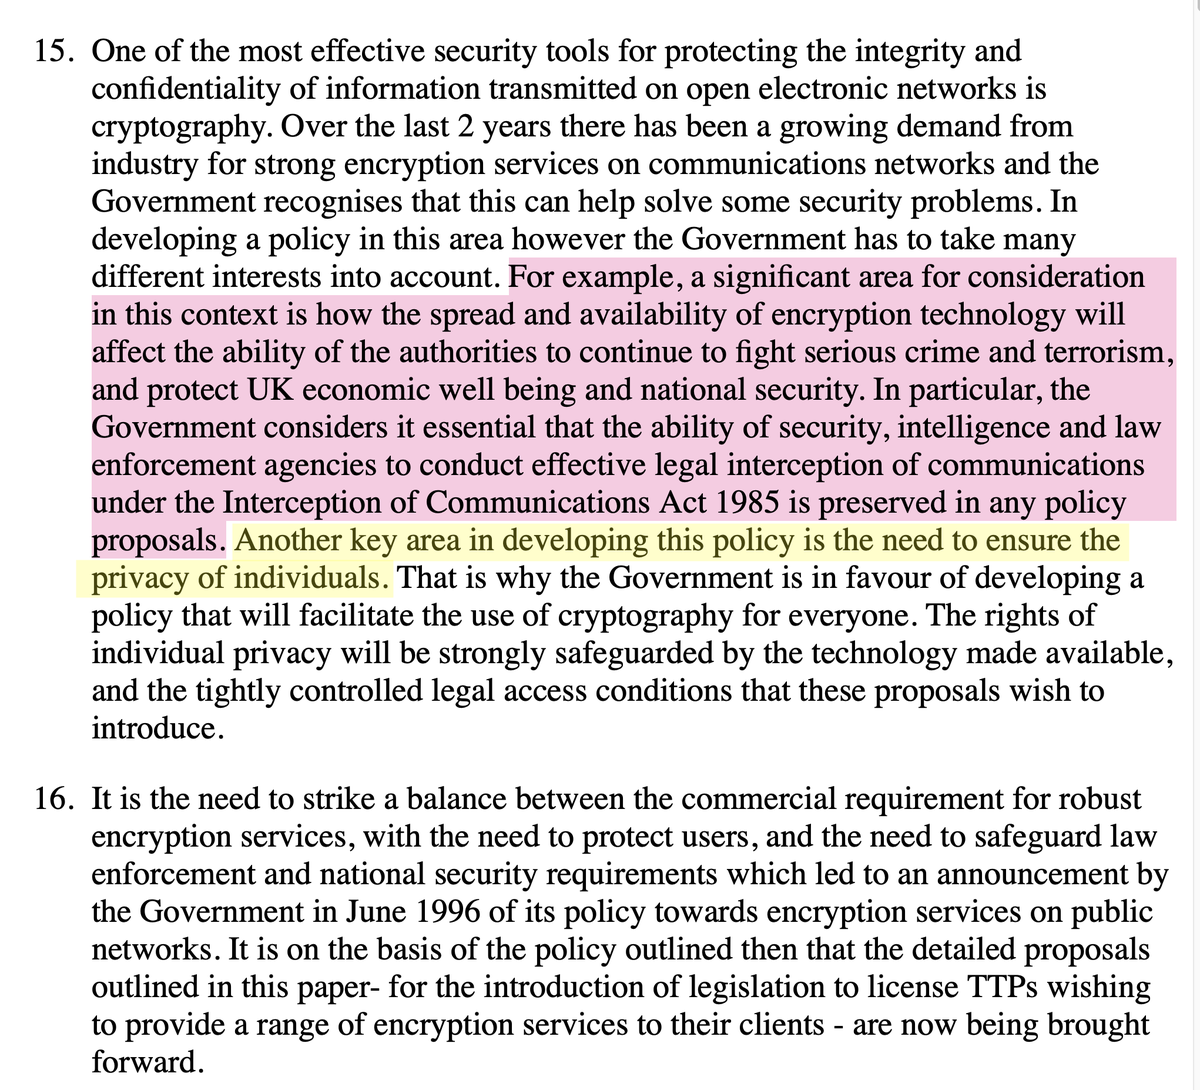 To this day I strongly believe that the ratio of pink-text to yellow-text in this paragraph, reflects the Government's actual concern for the privacy of individuals: